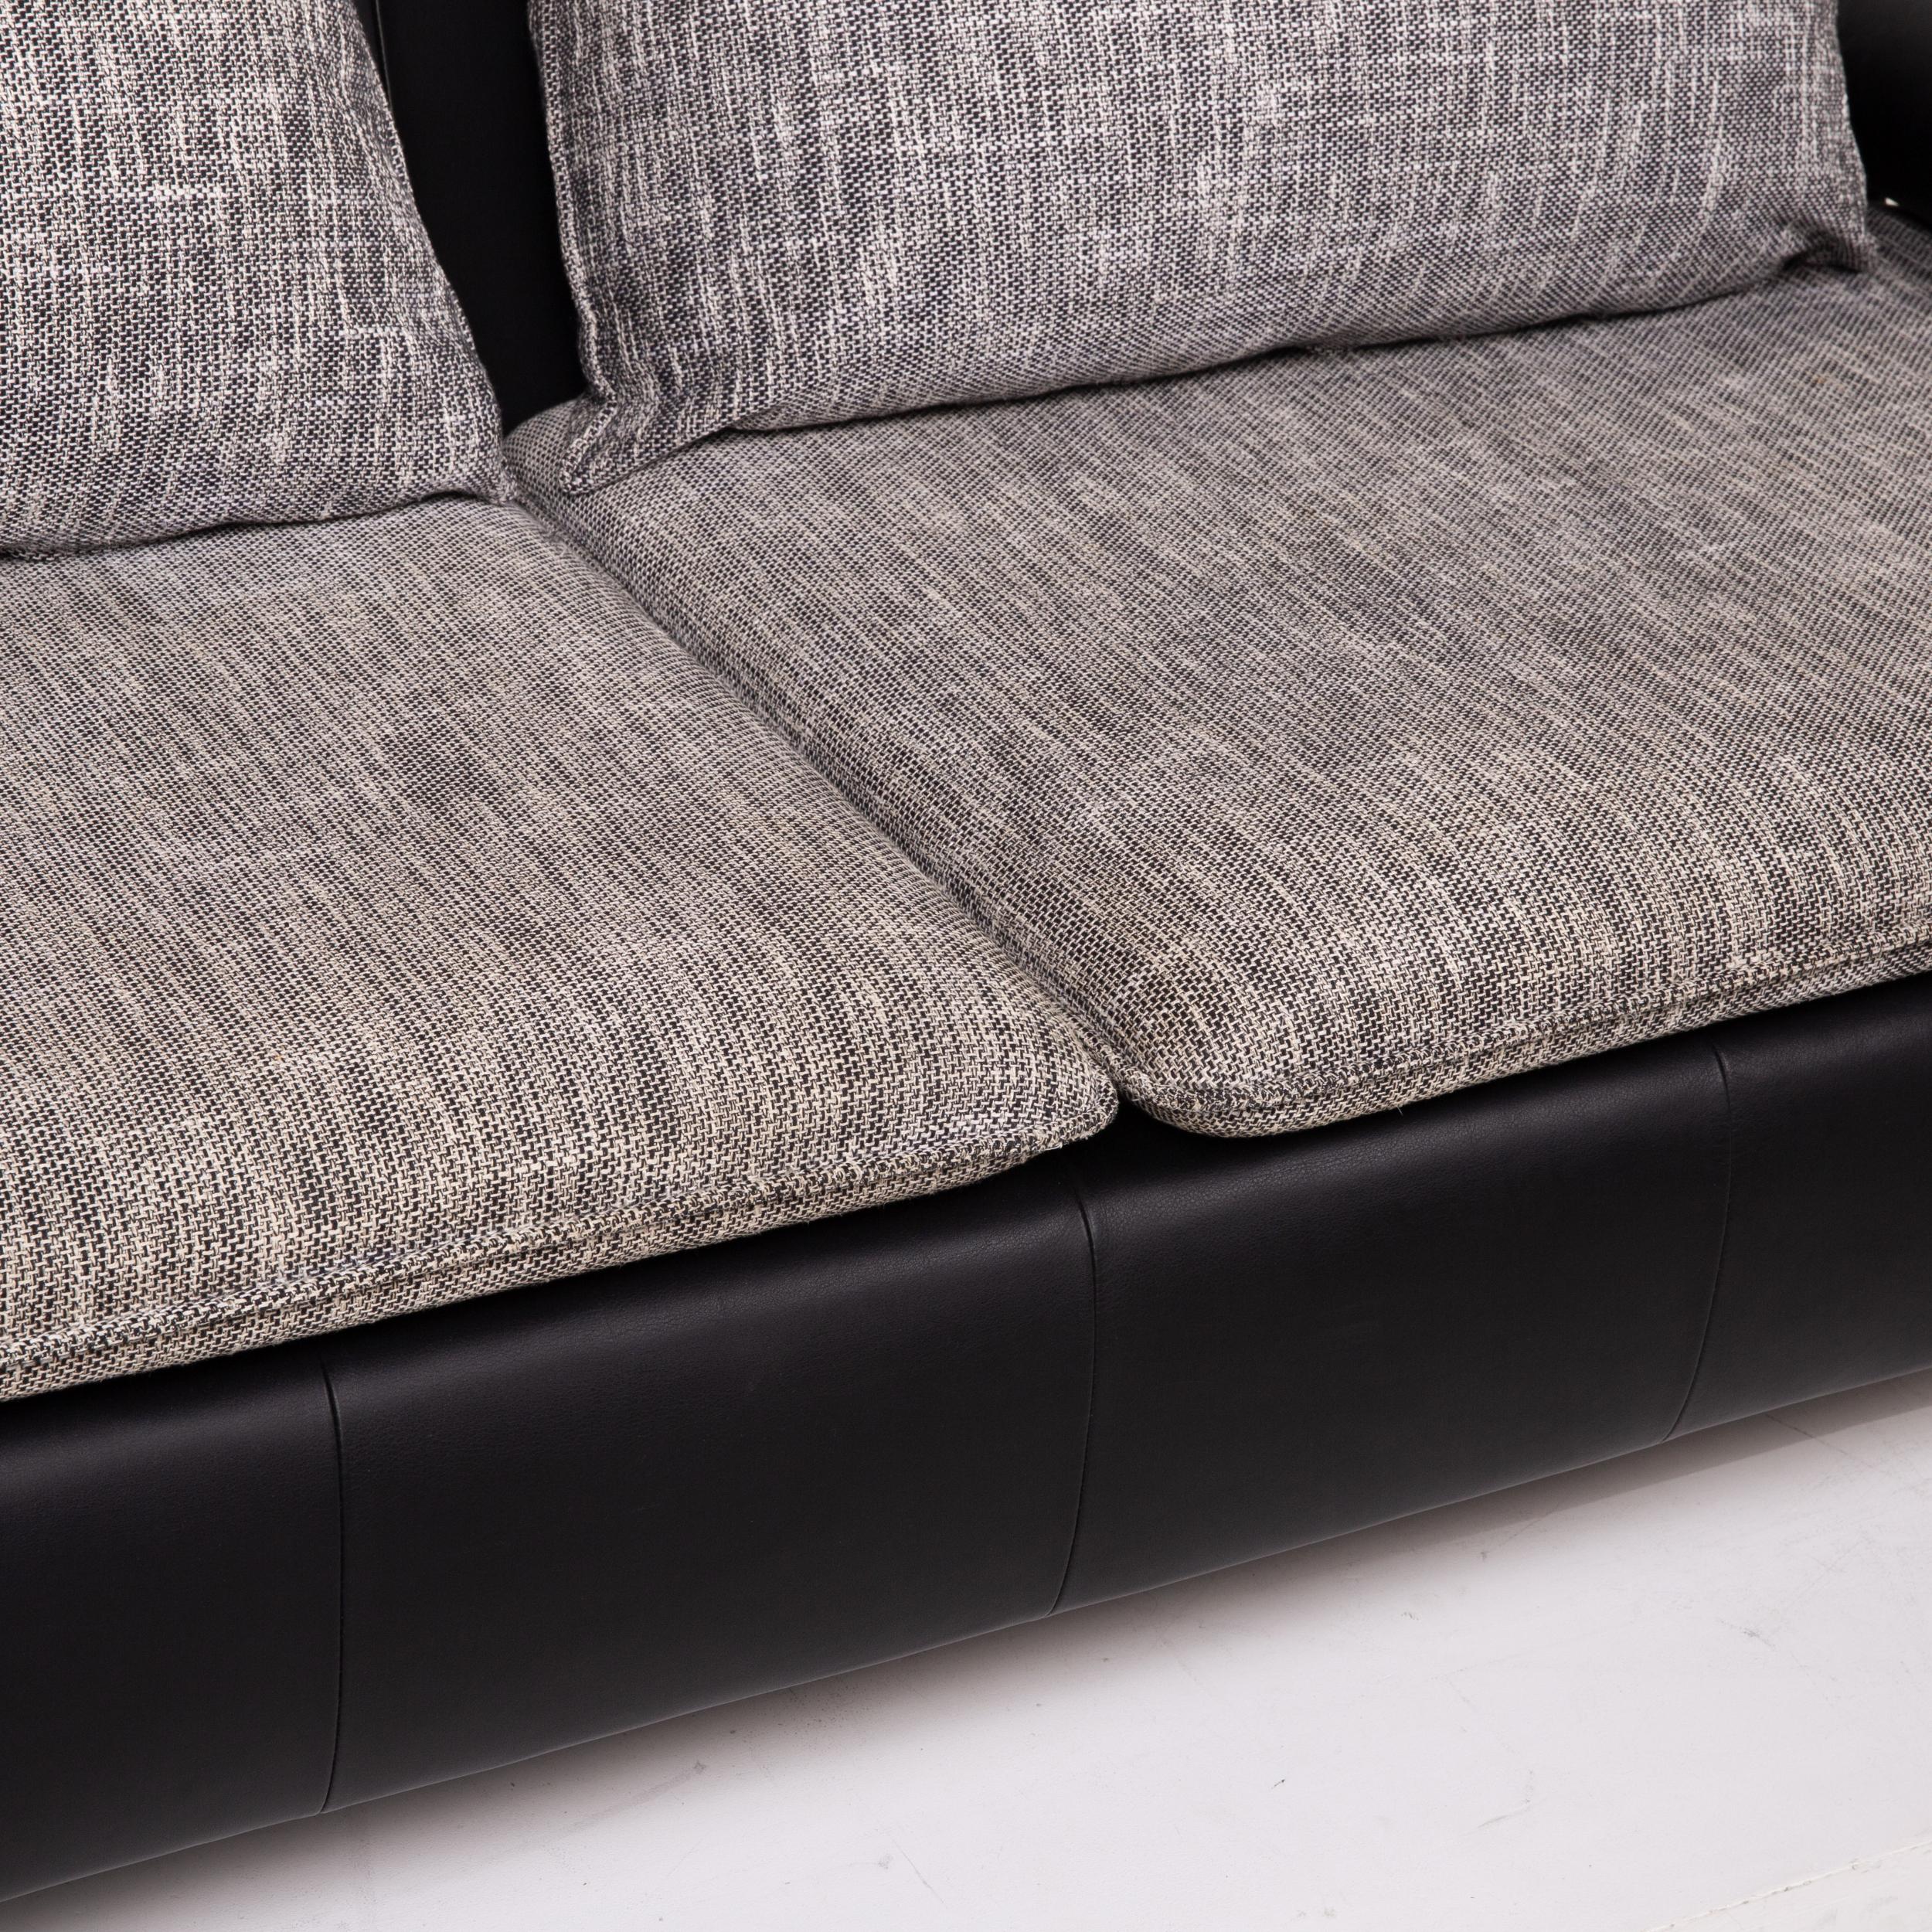 Modern Möller Design Tayo Leather Sofa Black Two-Seat Couch